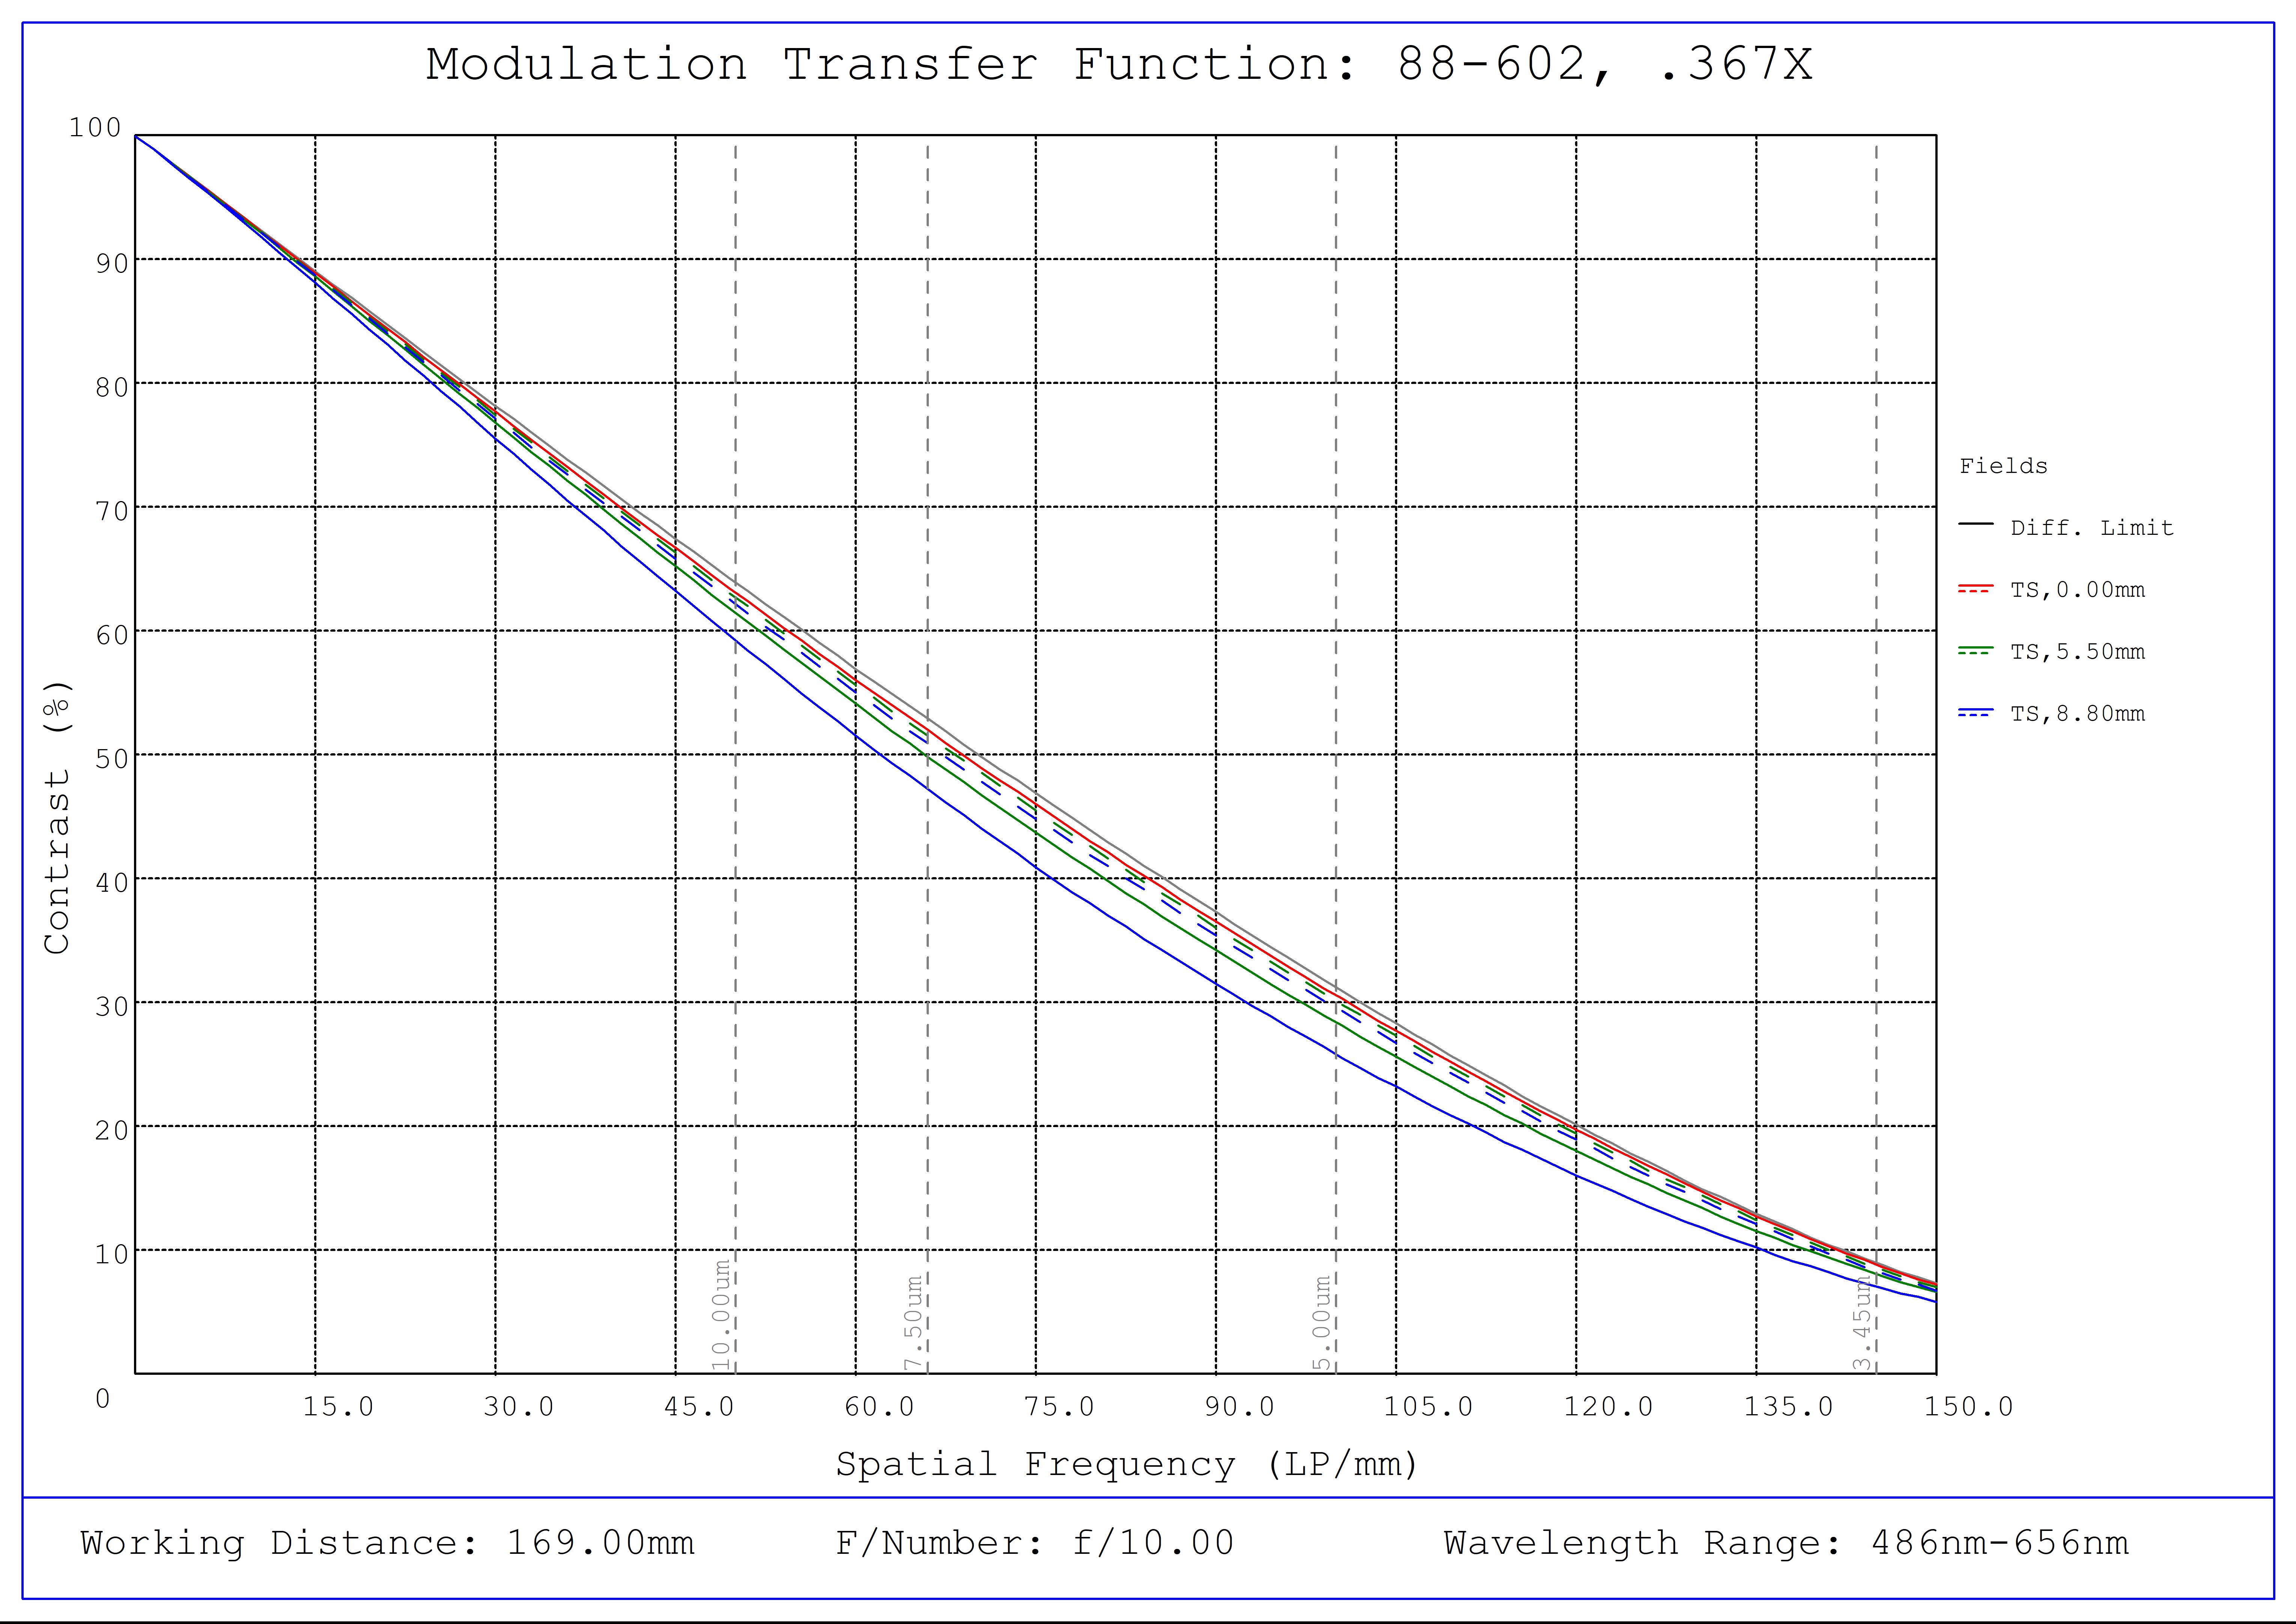 #88-602, 0.367X CobaltTL Telecentric Lens, Modulated Transfer Function (MTF) Plot, 169mm Working Distance, f10